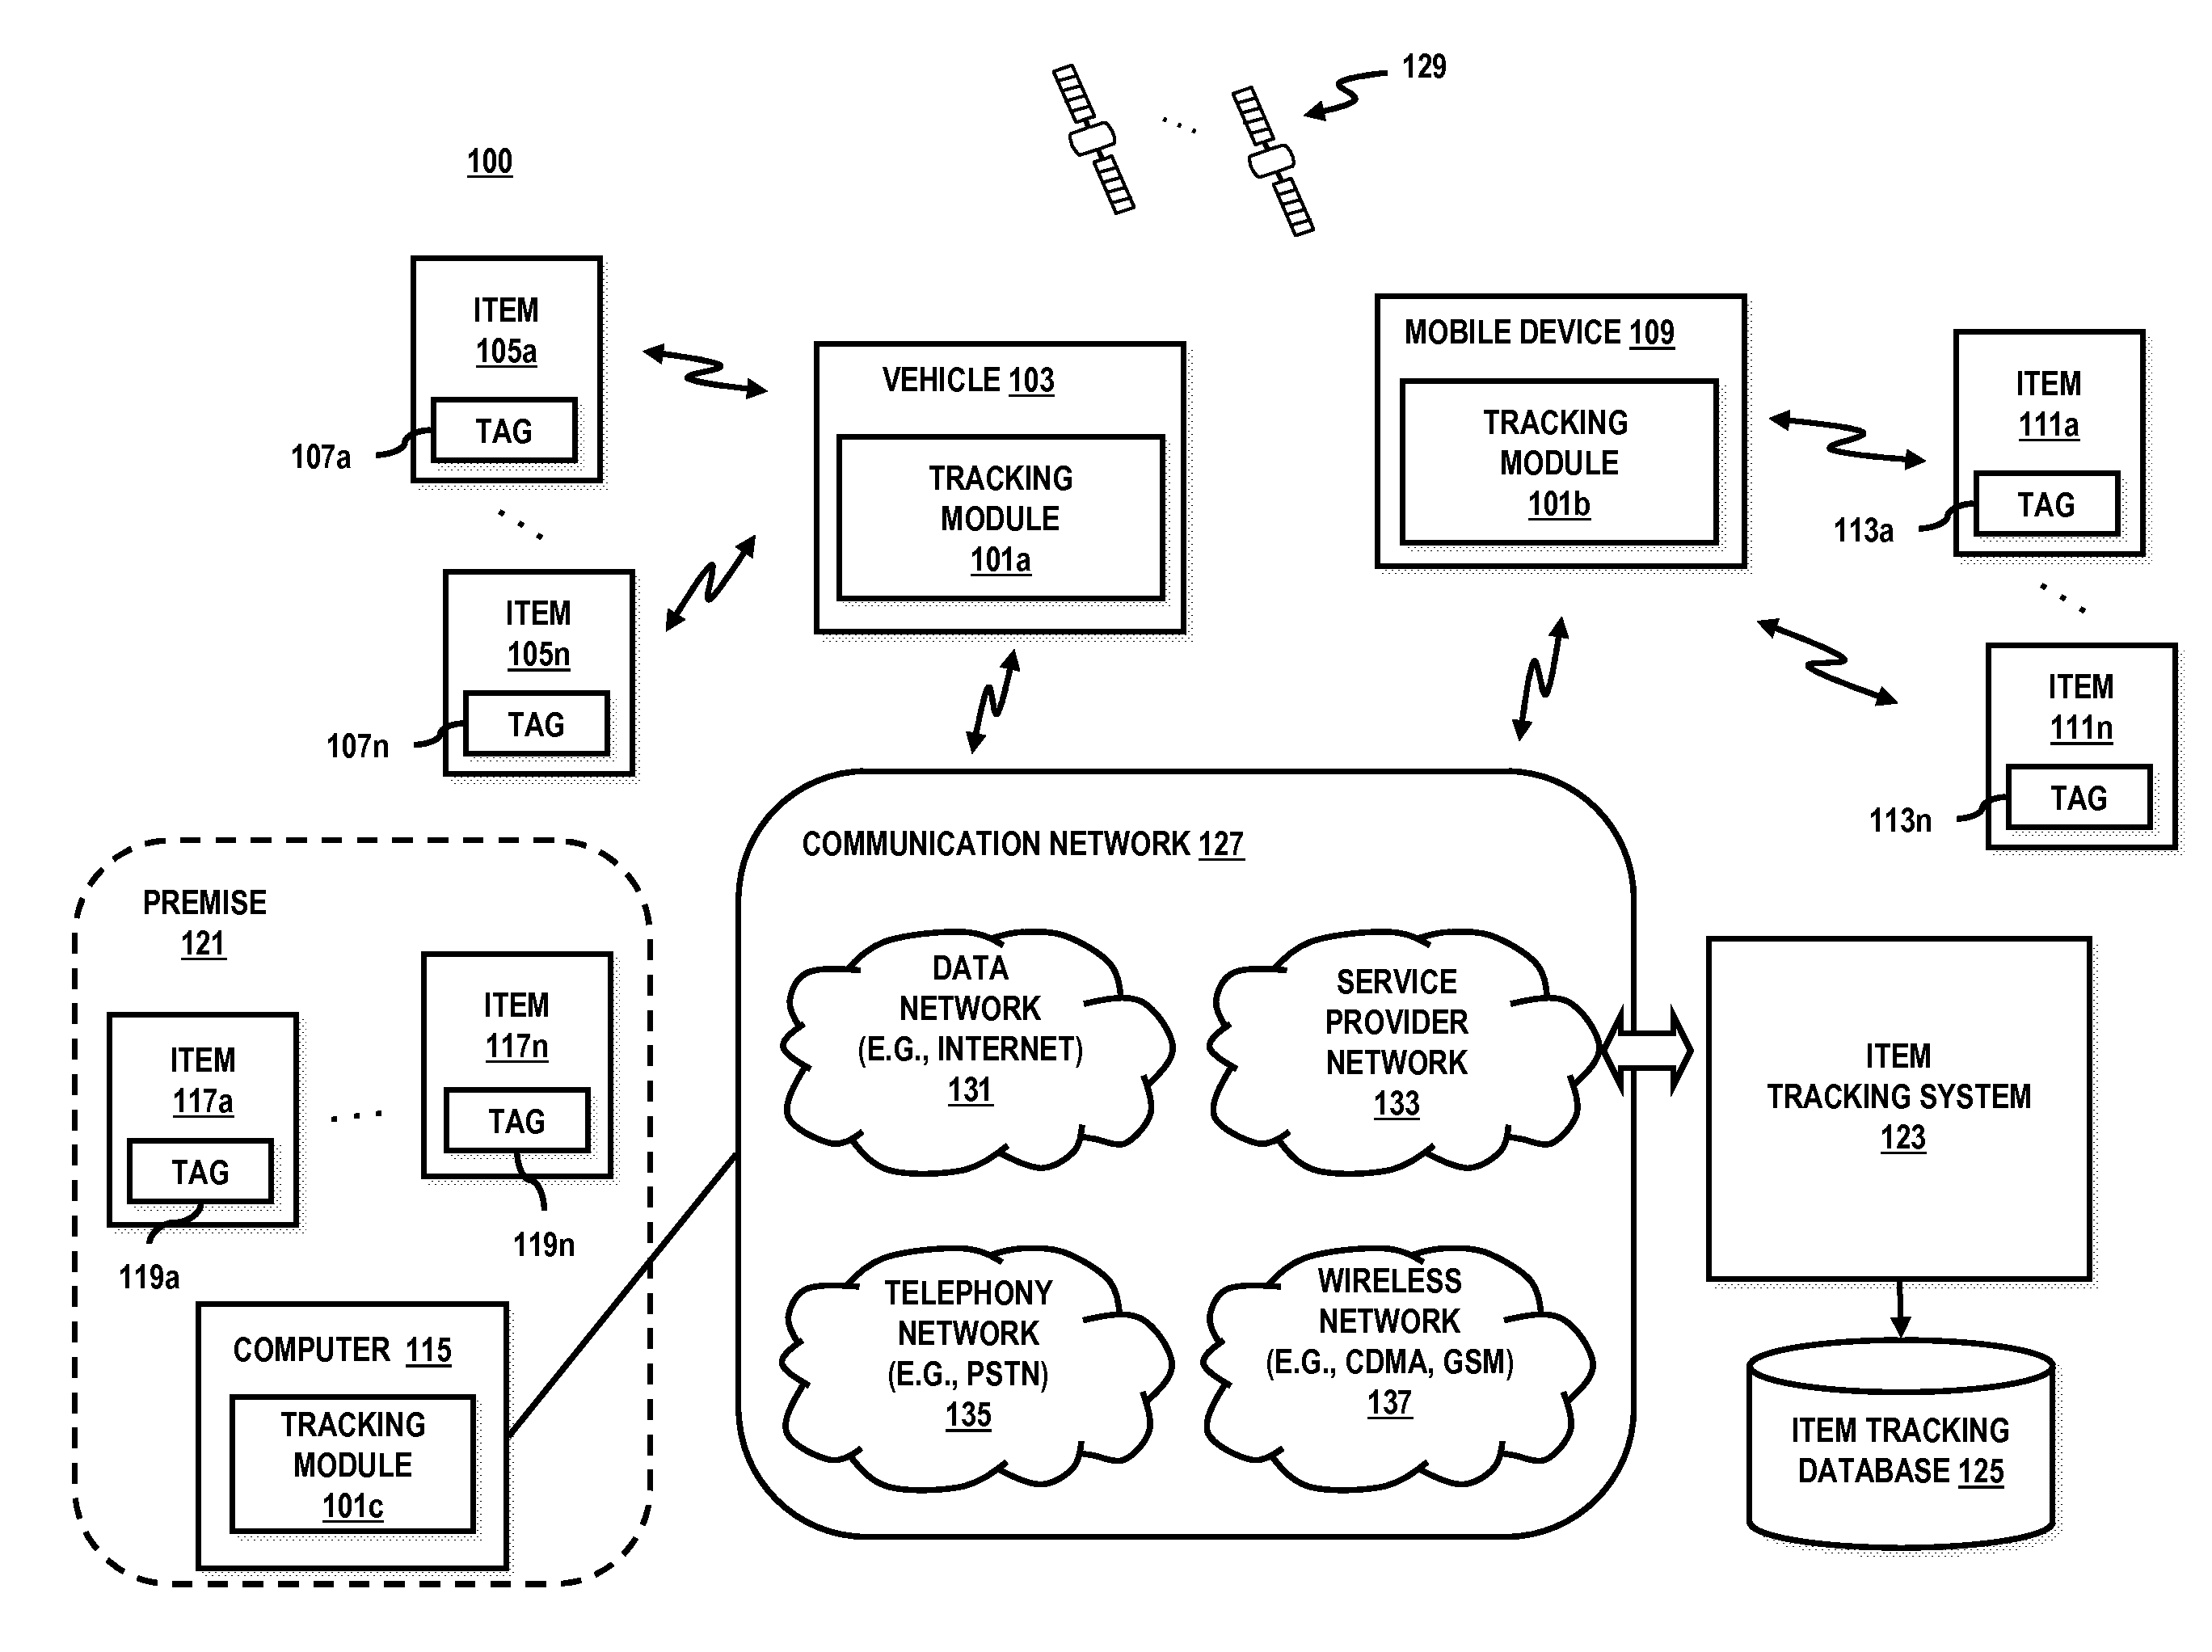 Method and system of providing location-based alerts for tracking personal items